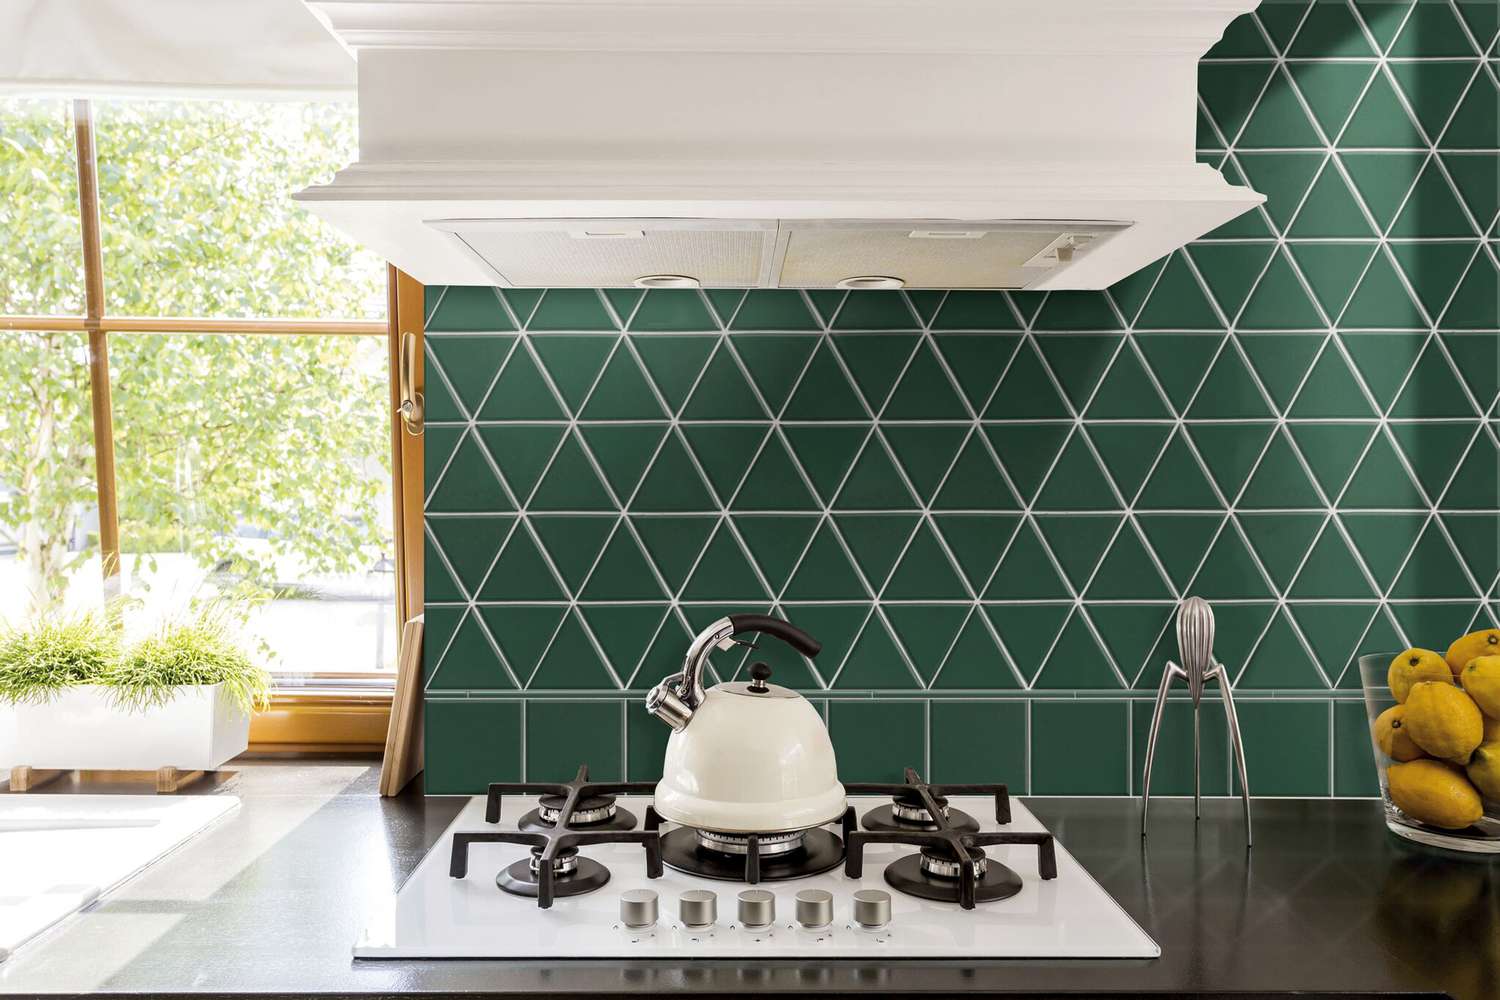 green tile behind stove top